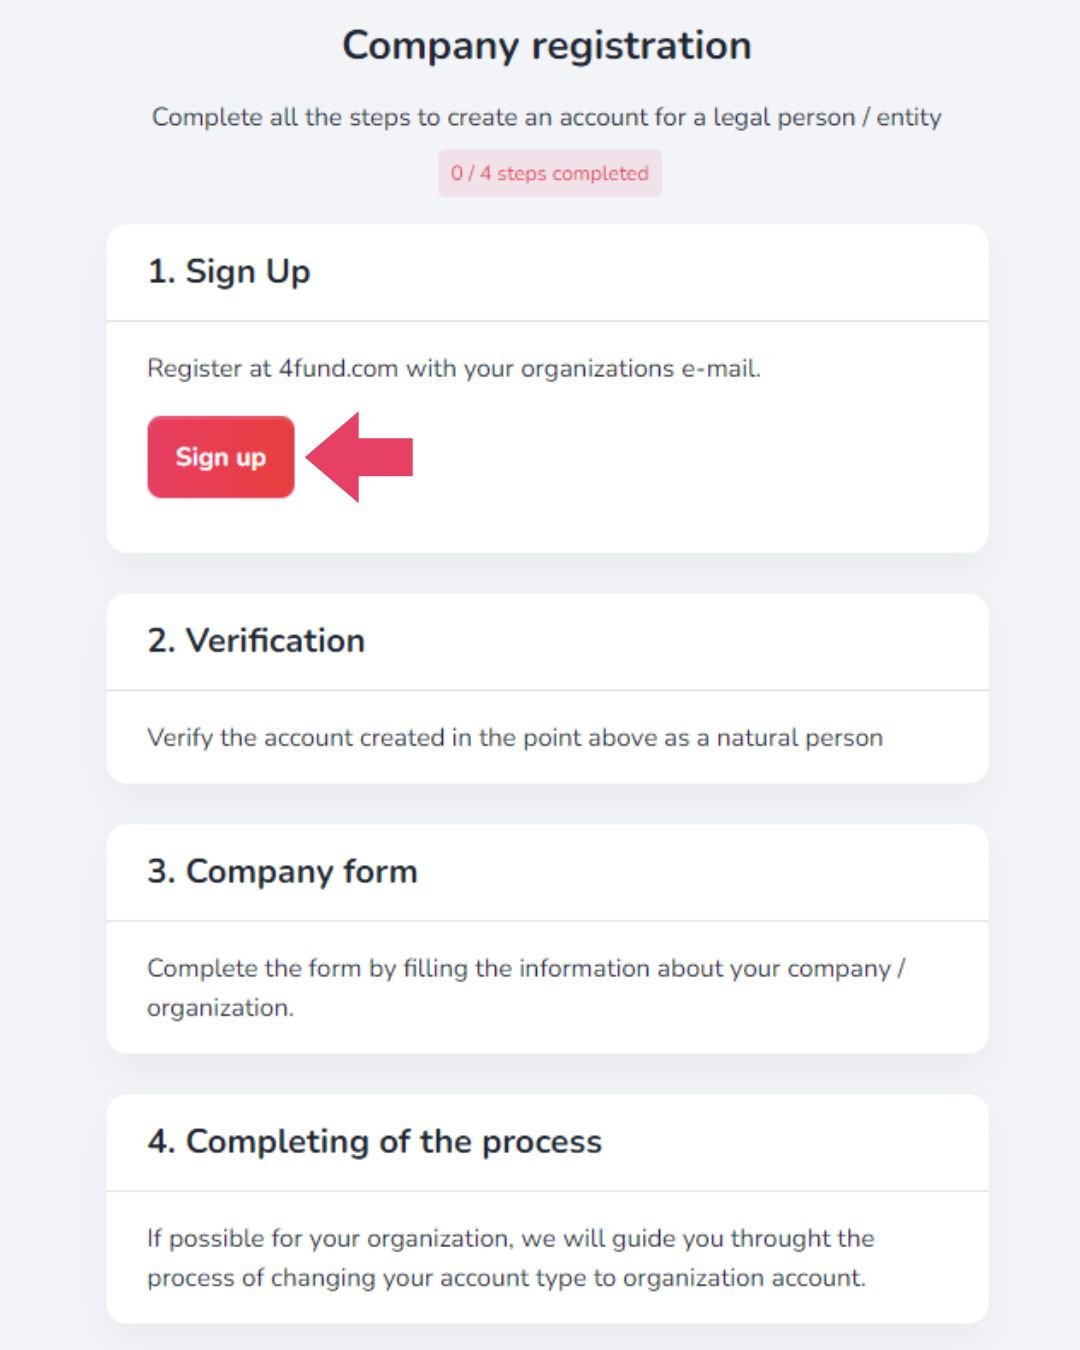 The screenshot shows the first step of the account registration process - signing up.